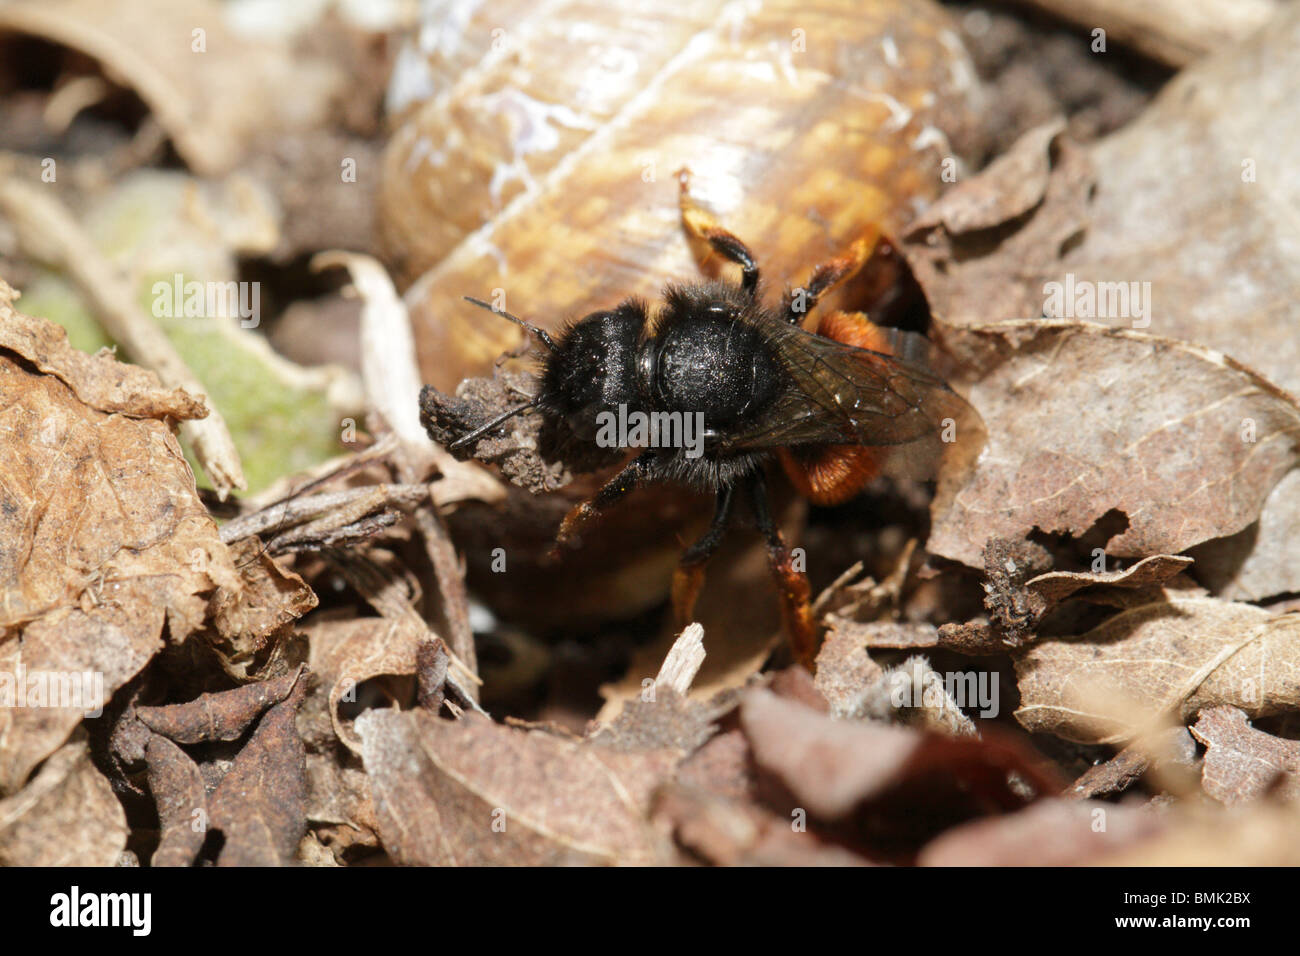 Osmia bicolor, a wild bee, building a nest in an old snail shell. Stock Photo